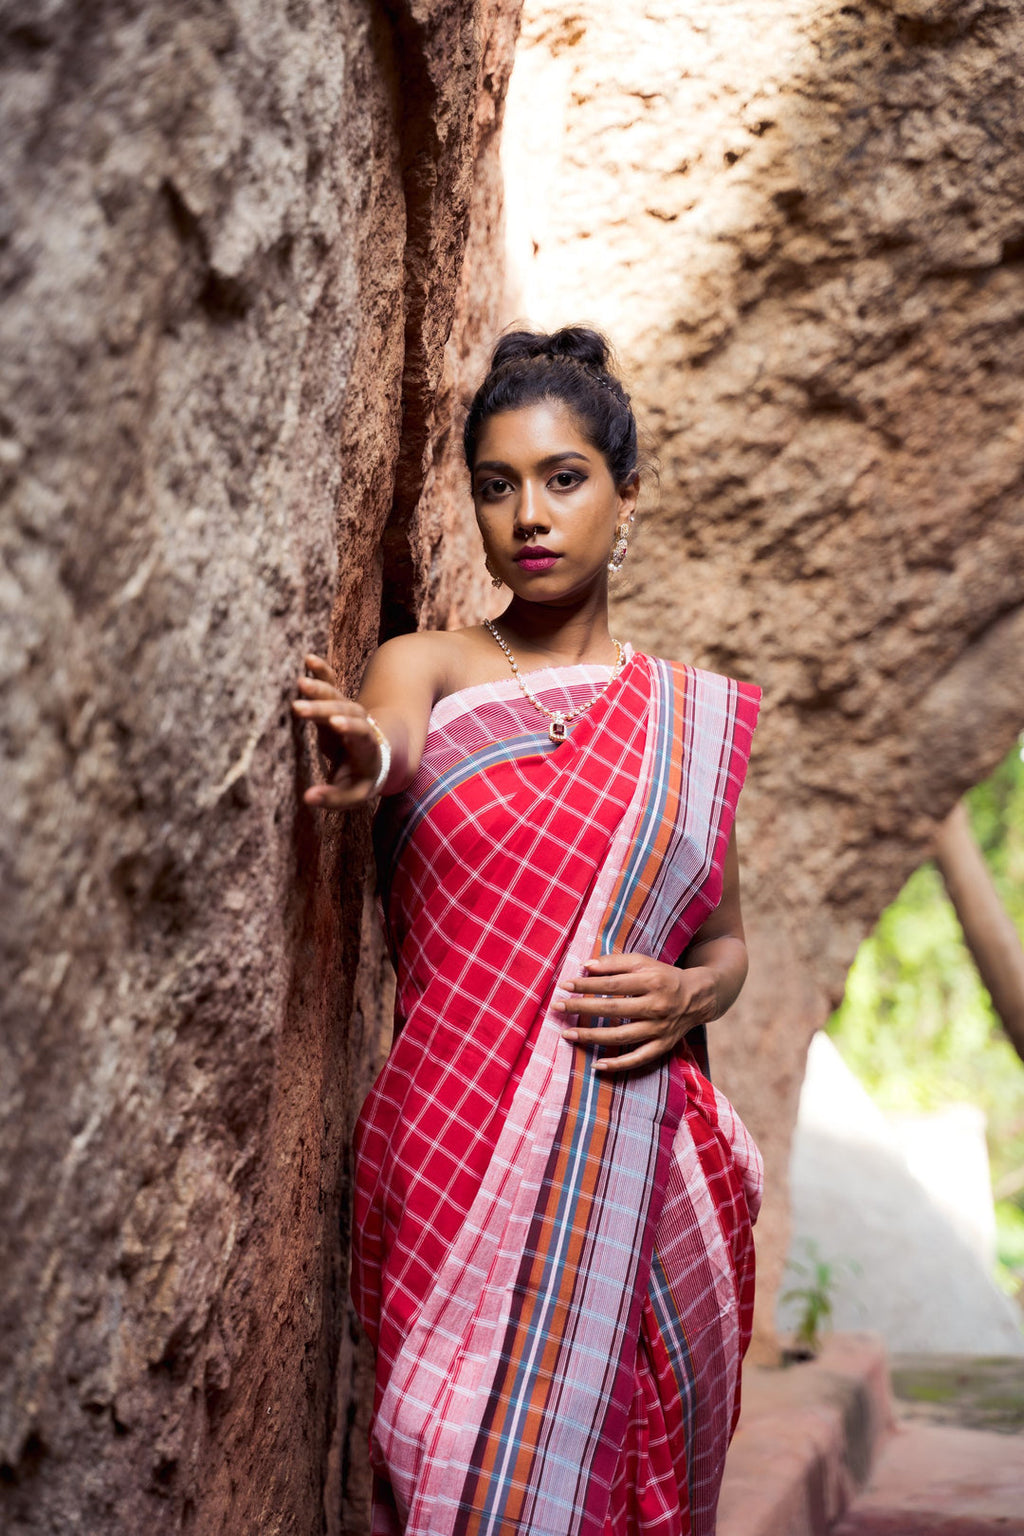 What is so unique about the KUNBI sarees of Goa?